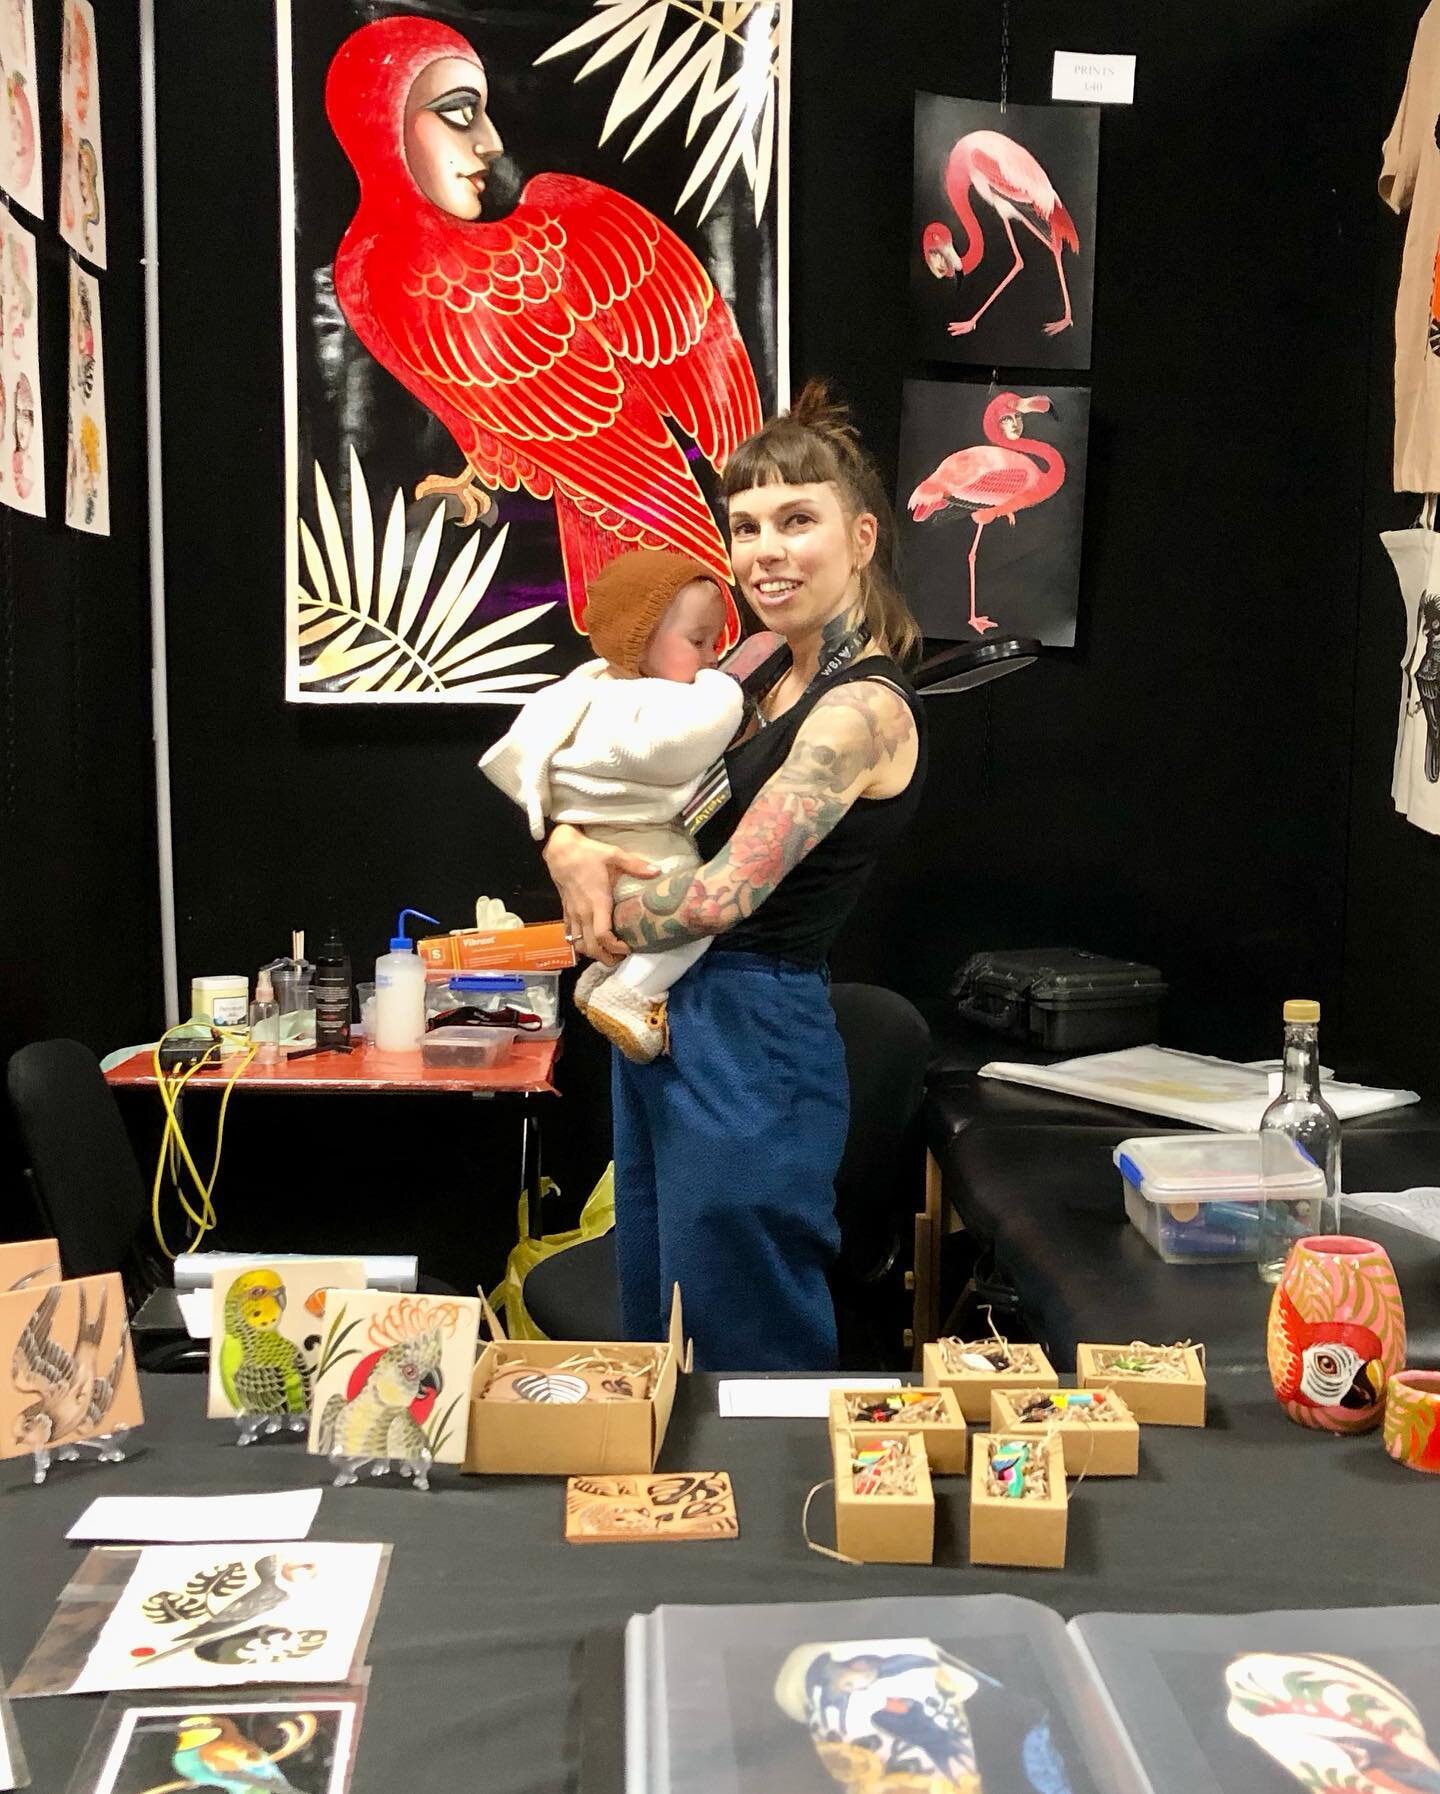 Weekend highlights!🌈 
Thank you @brightontattoocon for having us. Fantastic time with dear friends and clients. Great meeting some lovely new people too 🙌🏻
And extra special being able to share the fun with my daughter on her first earthside conve